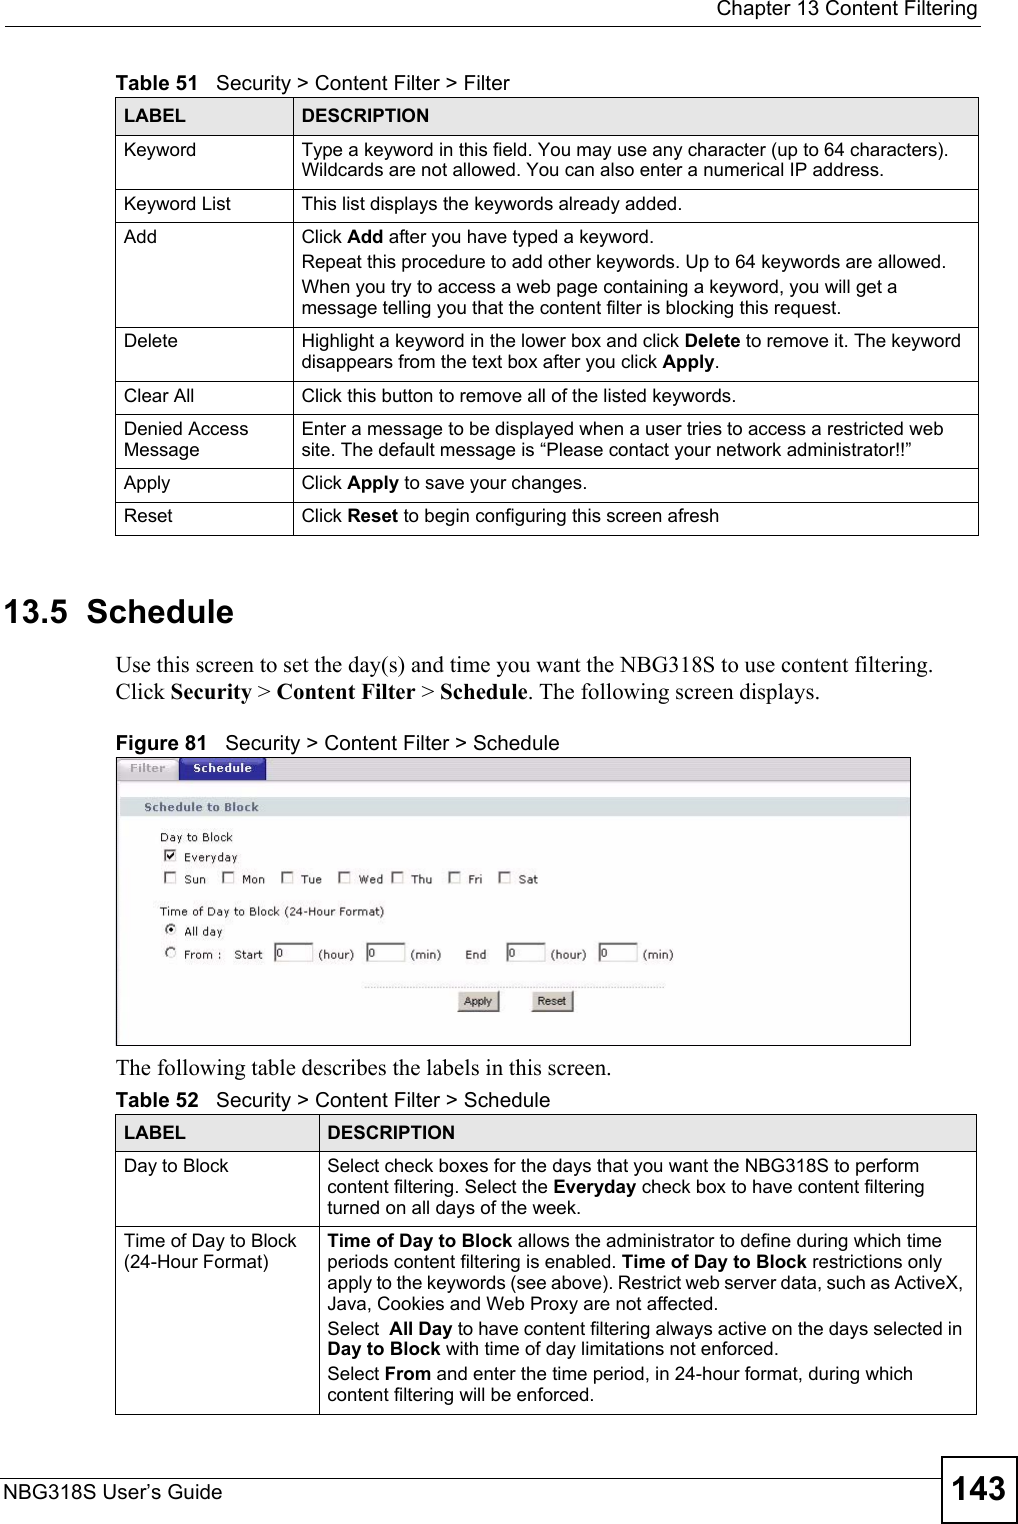  Chapter 13 Content FilteringNBG318S User’s Guide 14313.5  ScheduleUse this screen to set the day(s) and time you want the NBG318S to use content filtering. Click Security &gt; Content Filter &gt; Schedule. The following screen displays.Figure 81   Security &gt; Content Filter &gt; ScheduleThe following table describes the labels in this screen.Keyword Type a keyword in this field. You may use any character (up to 64 characters). Wildcards are not allowed. You can also enter a numerical IP address.Keyword List This list displays the keywords already added. Add  Click Add after you have typed a keyword. Repeat this procedure to add other keywords. Up to 64 keywords are allowed.When you try to access a web page containing a keyword, you will get a message telling you that the content filter is blocking this request.Delete Highlight a keyword in the lower box and click Delete to remove it. The keyword disappears from the text box after you click Apply.Clear All Click this button to remove all of the listed keywords.Denied Access MessageEnter a message to be displayed when a user tries to access a restricted web site. The default message is “Please contact your network administrator!!”Apply Click Apply to save your changes.Reset Click Reset to begin configuring this screen afreshTable 51   Security &gt; Content Filter &gt; FilterLABEL DESCRIPTIONTable 52   Security &gt; Content Filter &gt; ScheduleLABEL DESCRIPTIONDay to Block Select check boxes for the days that you want the NBG318S to perform content filtering. Select the Everyday check box to have content filtering turned on all days of the week.Time of Day to Block (24-Hour Format)Time of Day to Block allows the administrator to define during which time periods content filtering is enabled. Time of Day to Block restrictions only apply to the keywords (see above). Restrict web server data, such as ActiveX, Java, Cookies and Web Proxy are not affected.Select  All Day to have content filtering always active on the days selected in Day to Block with time of day limitations not enforced.Select From and enter the time period, in 24-hour format, during which content filtering will be enforced. 